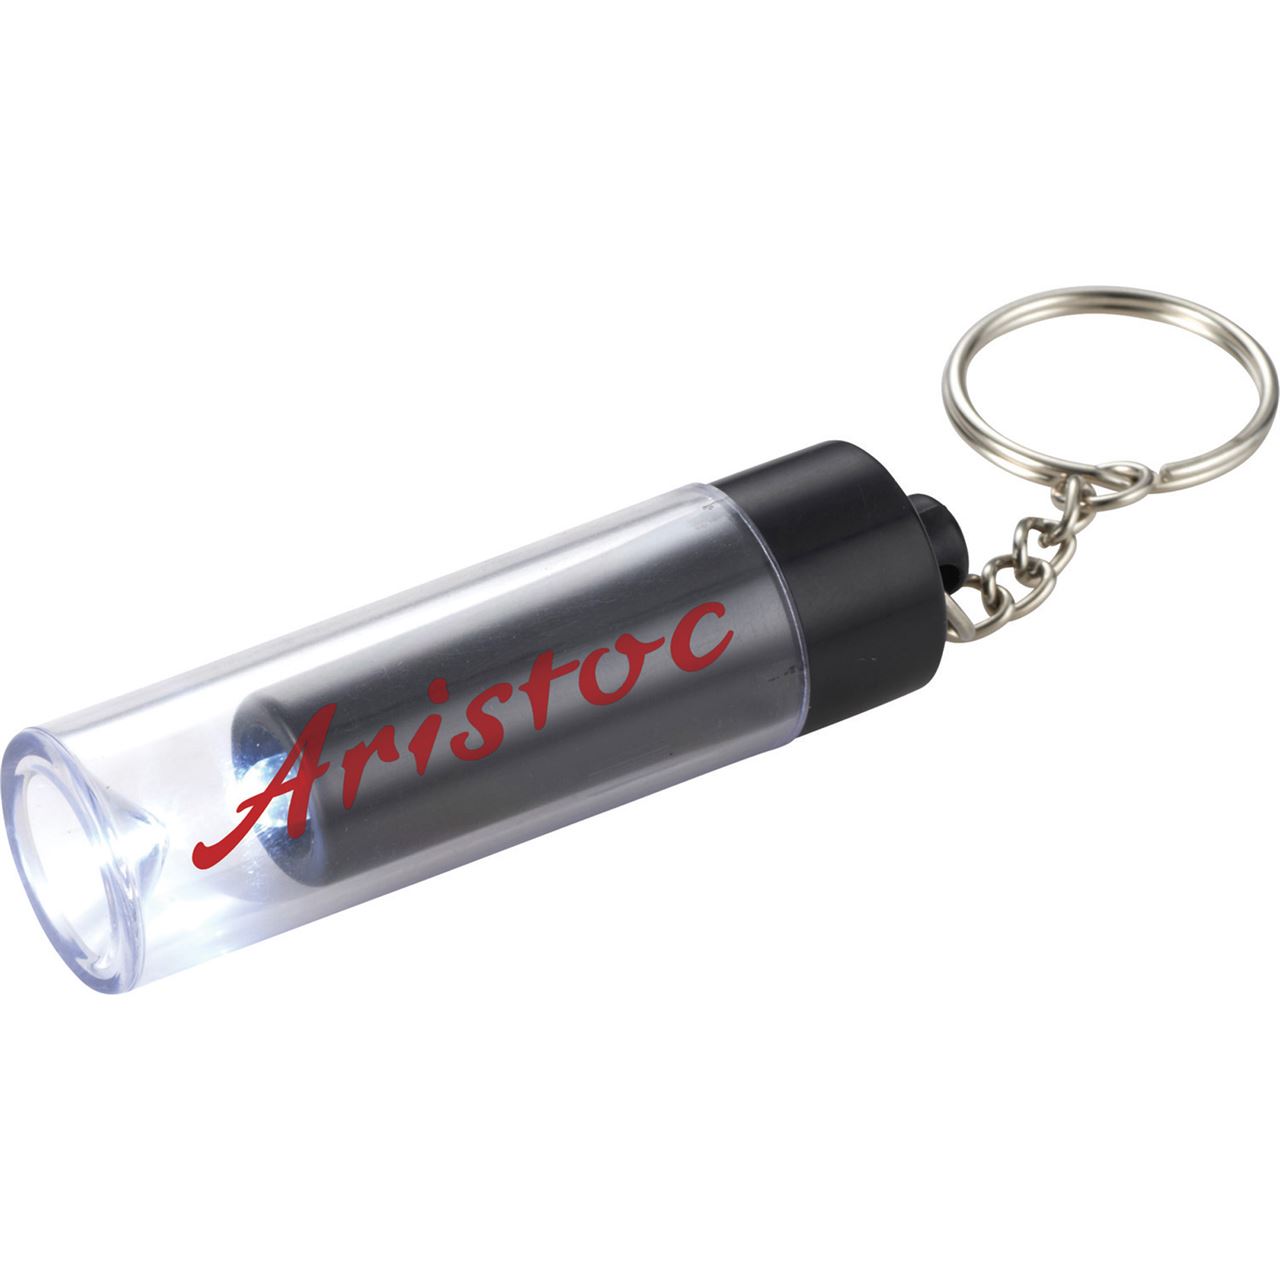 Picture of Bullet The Marina Key-Light